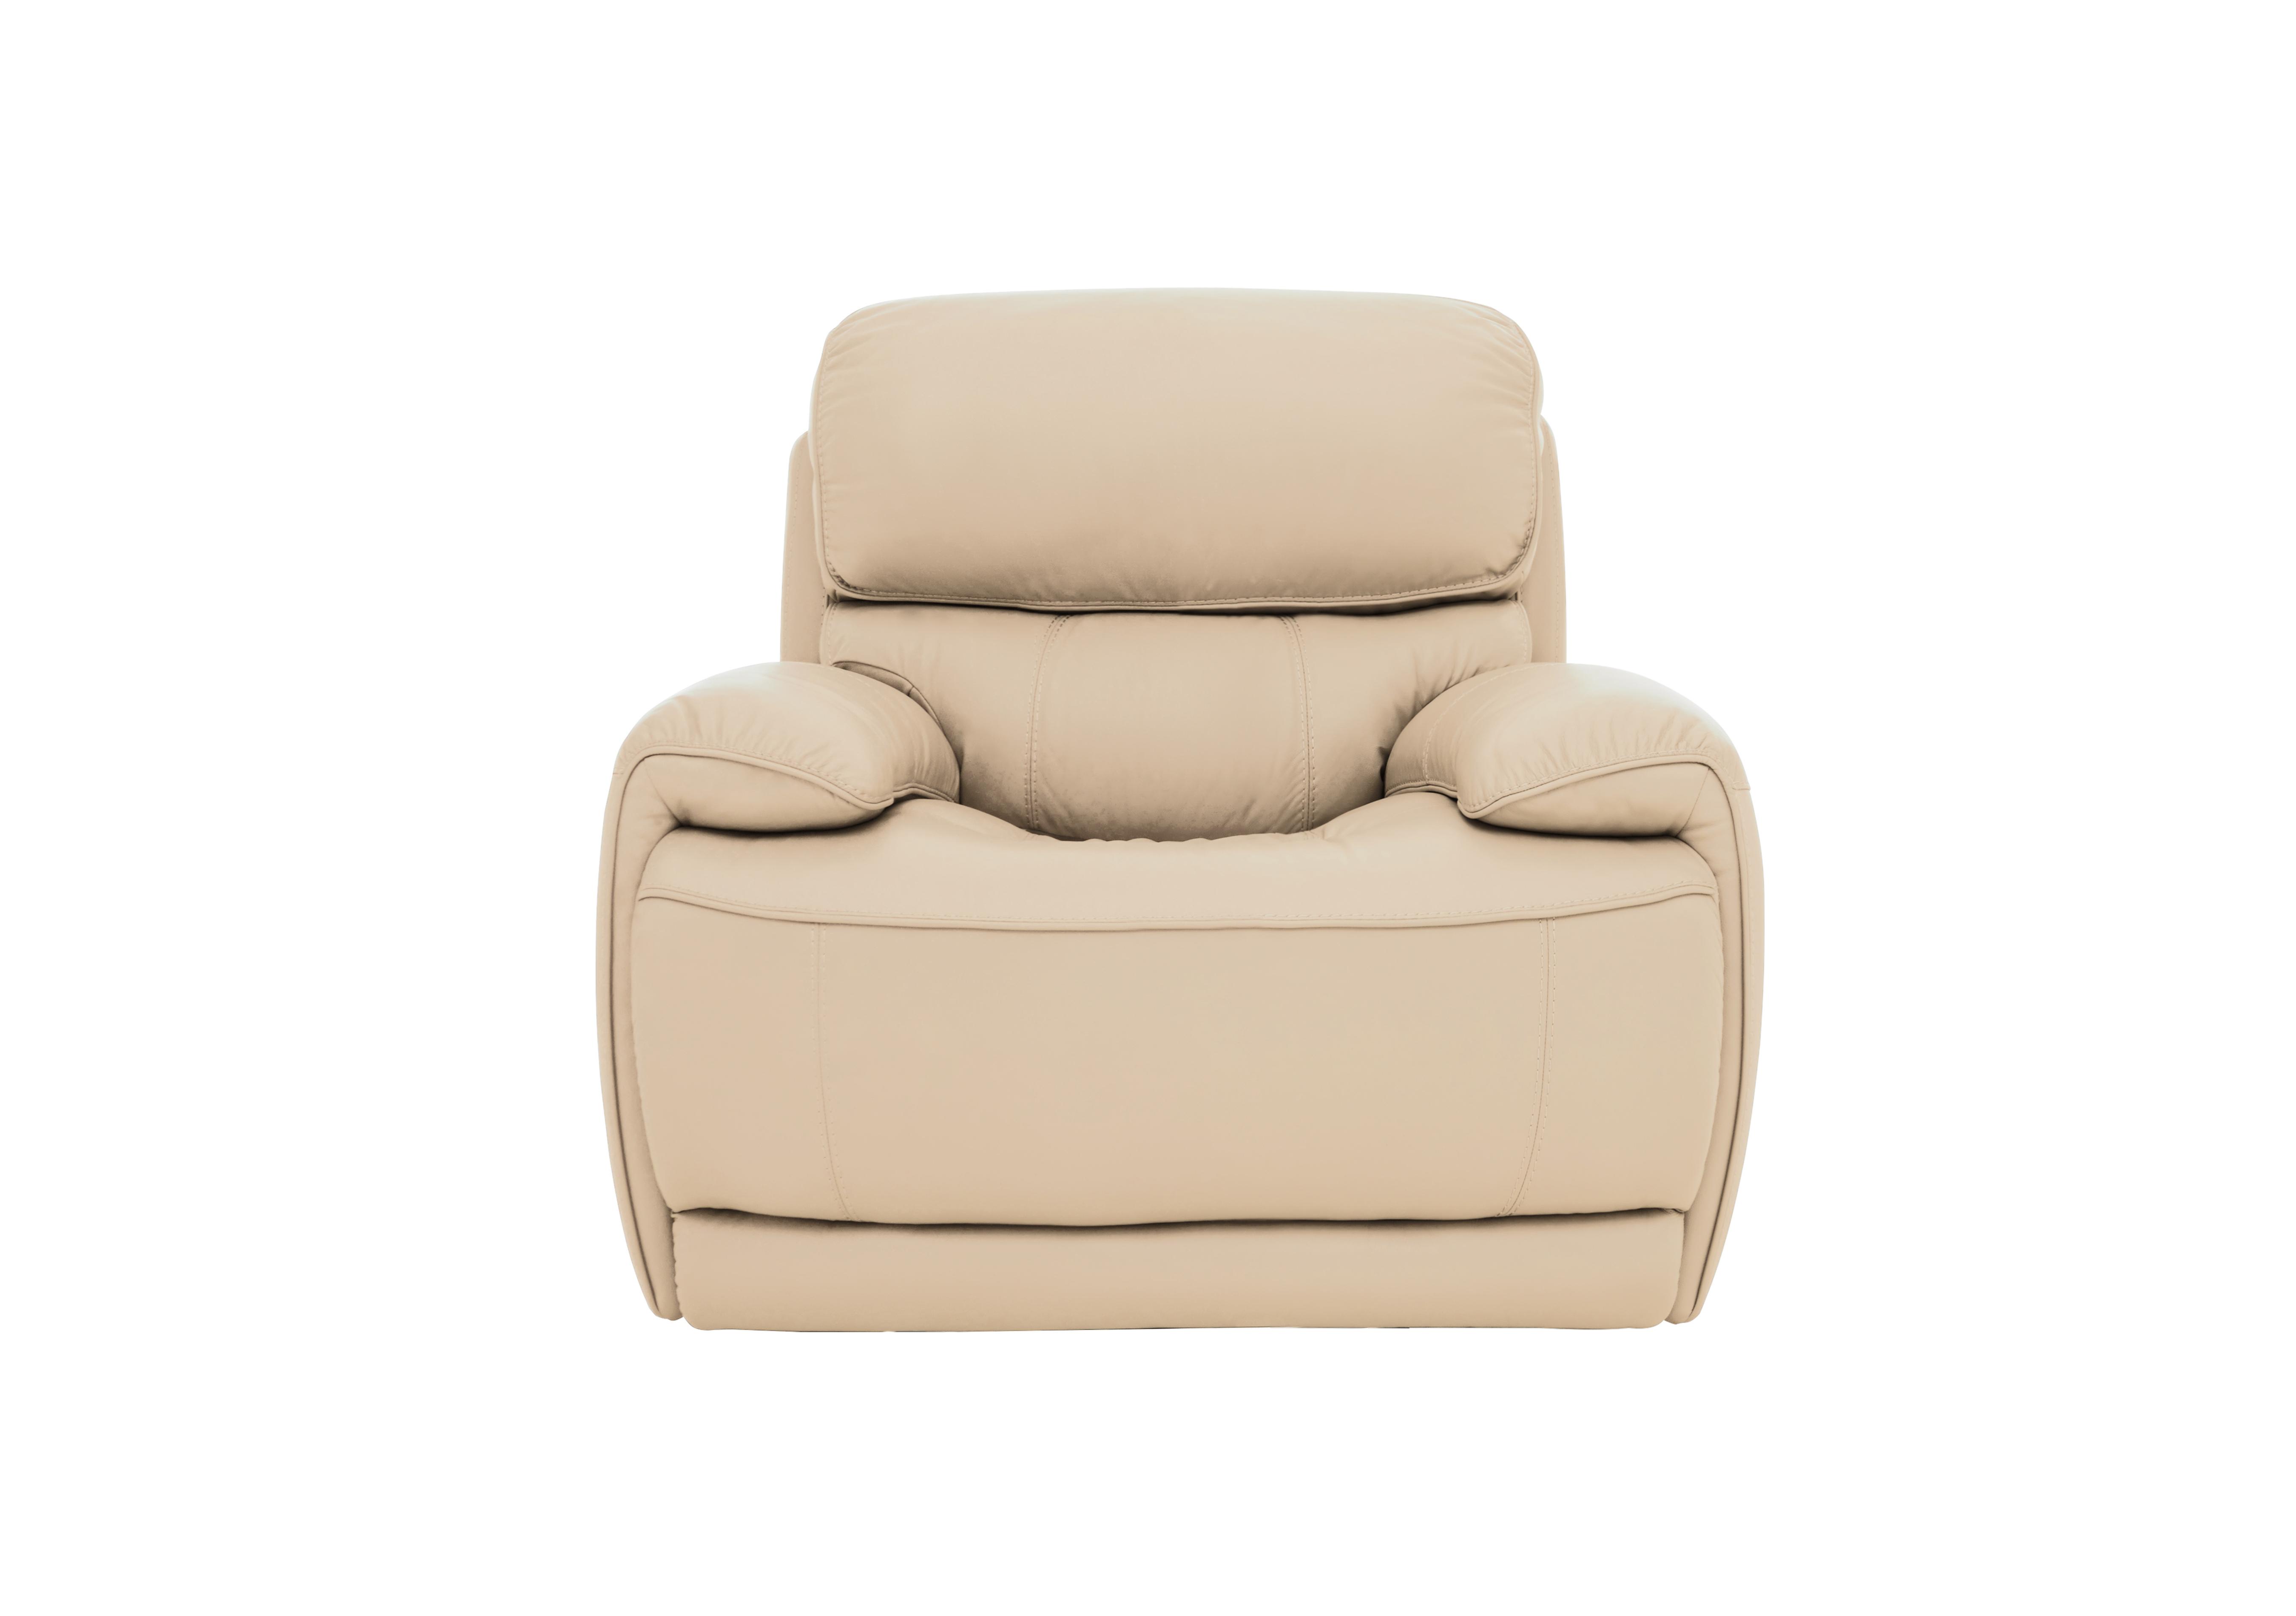 Rocco Leather Power Rocker Armchair with Power Headrests in Bv-862c Bisque on Furniture Village